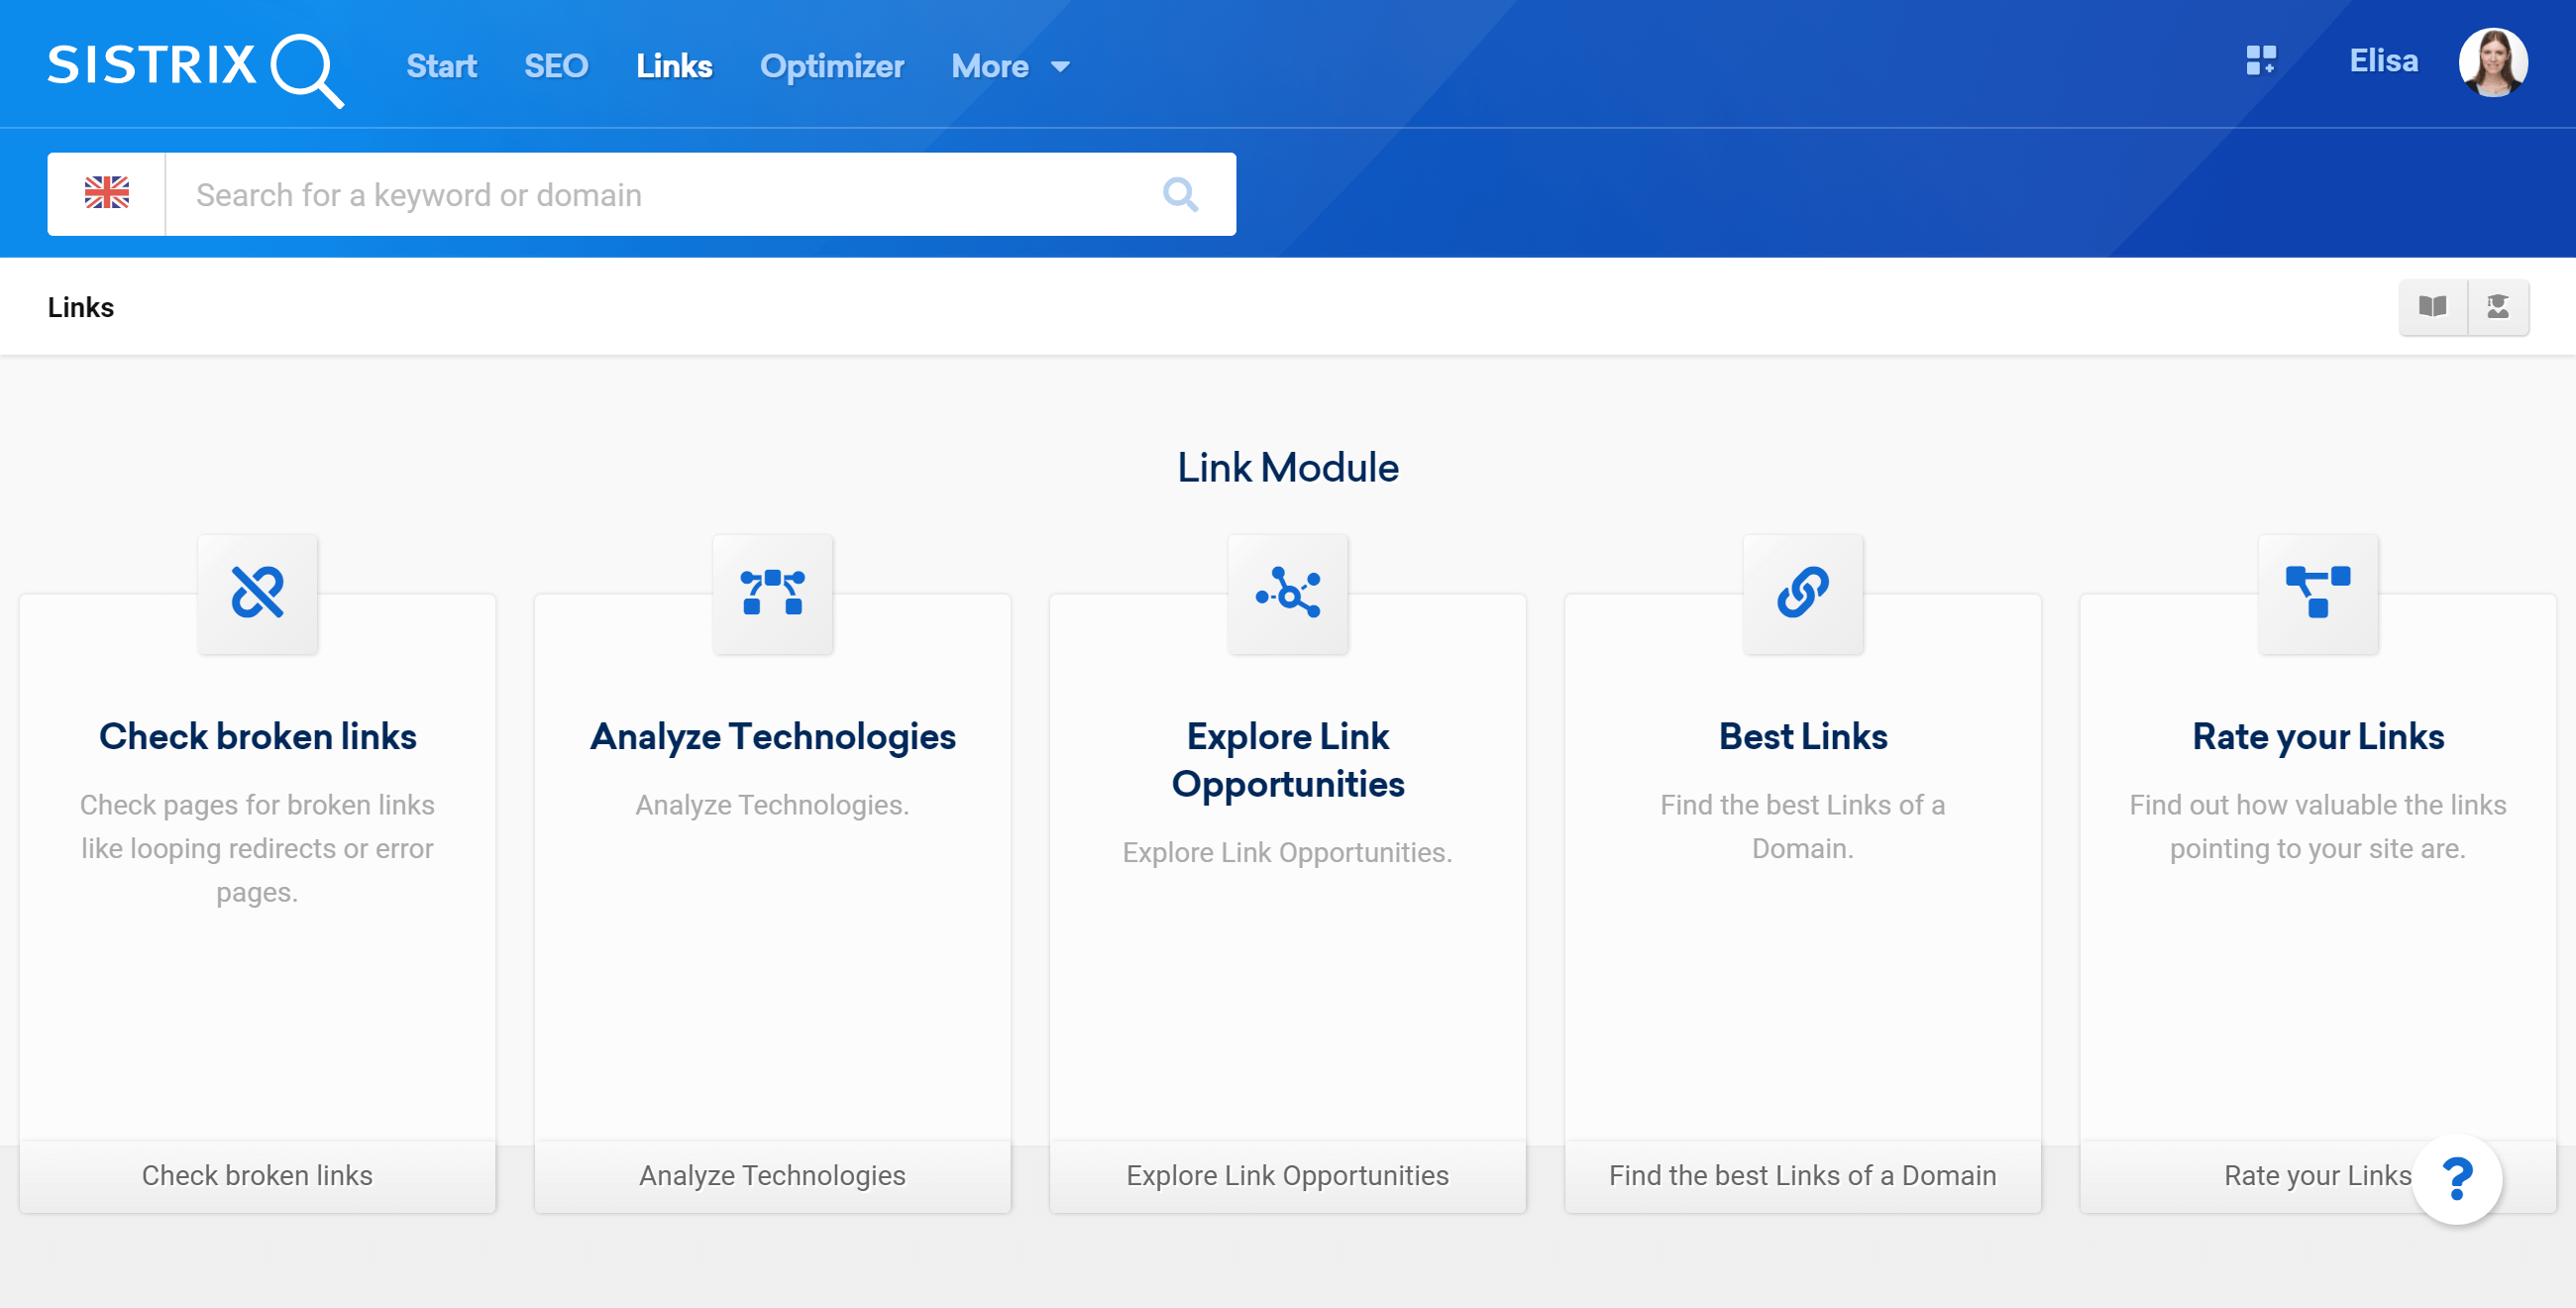 Startpage of the Link Module in the SISTRIX Toolbox